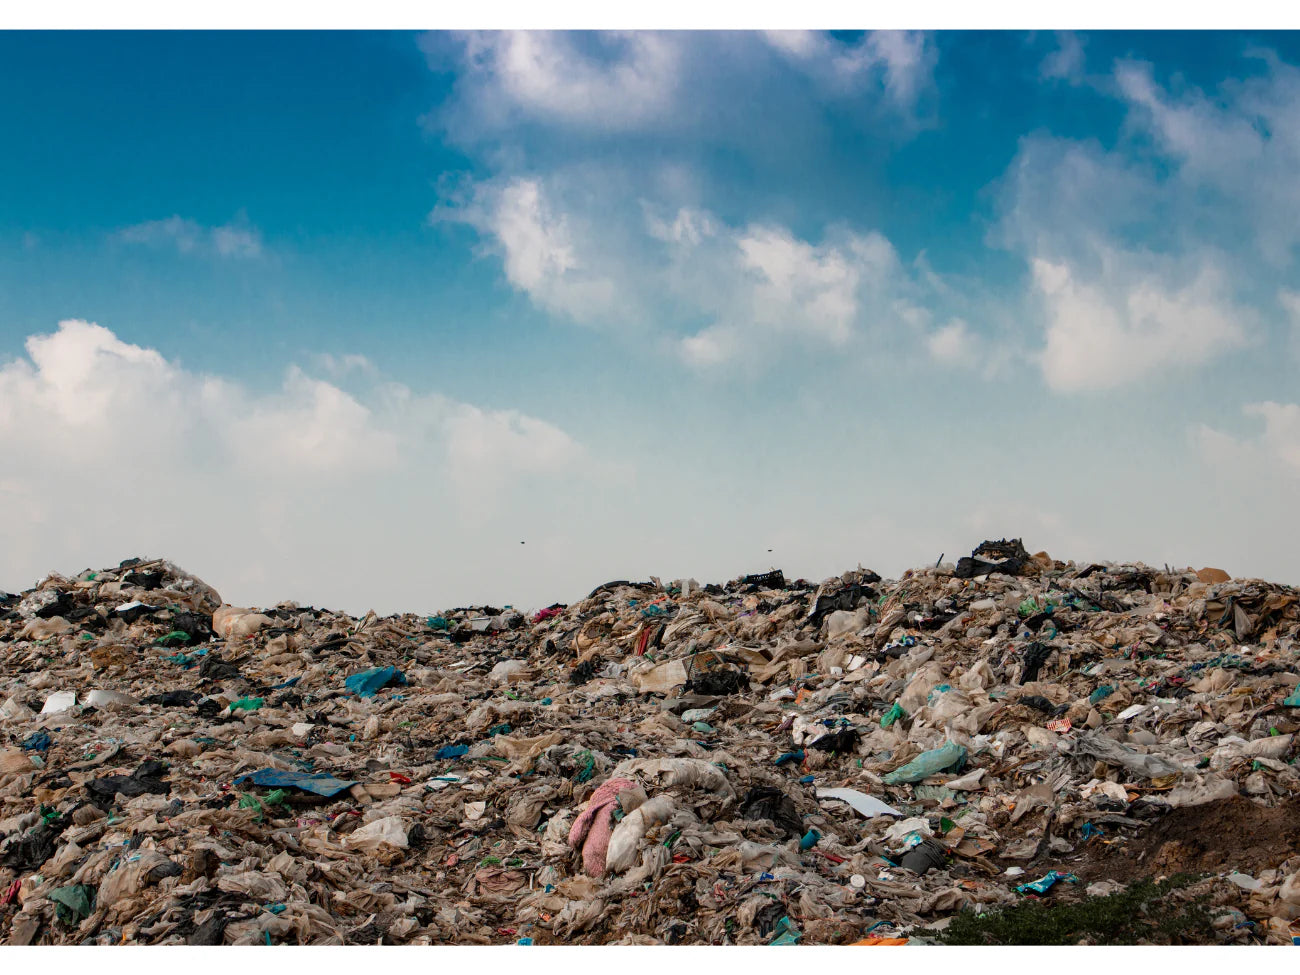 An image of waste in landfill